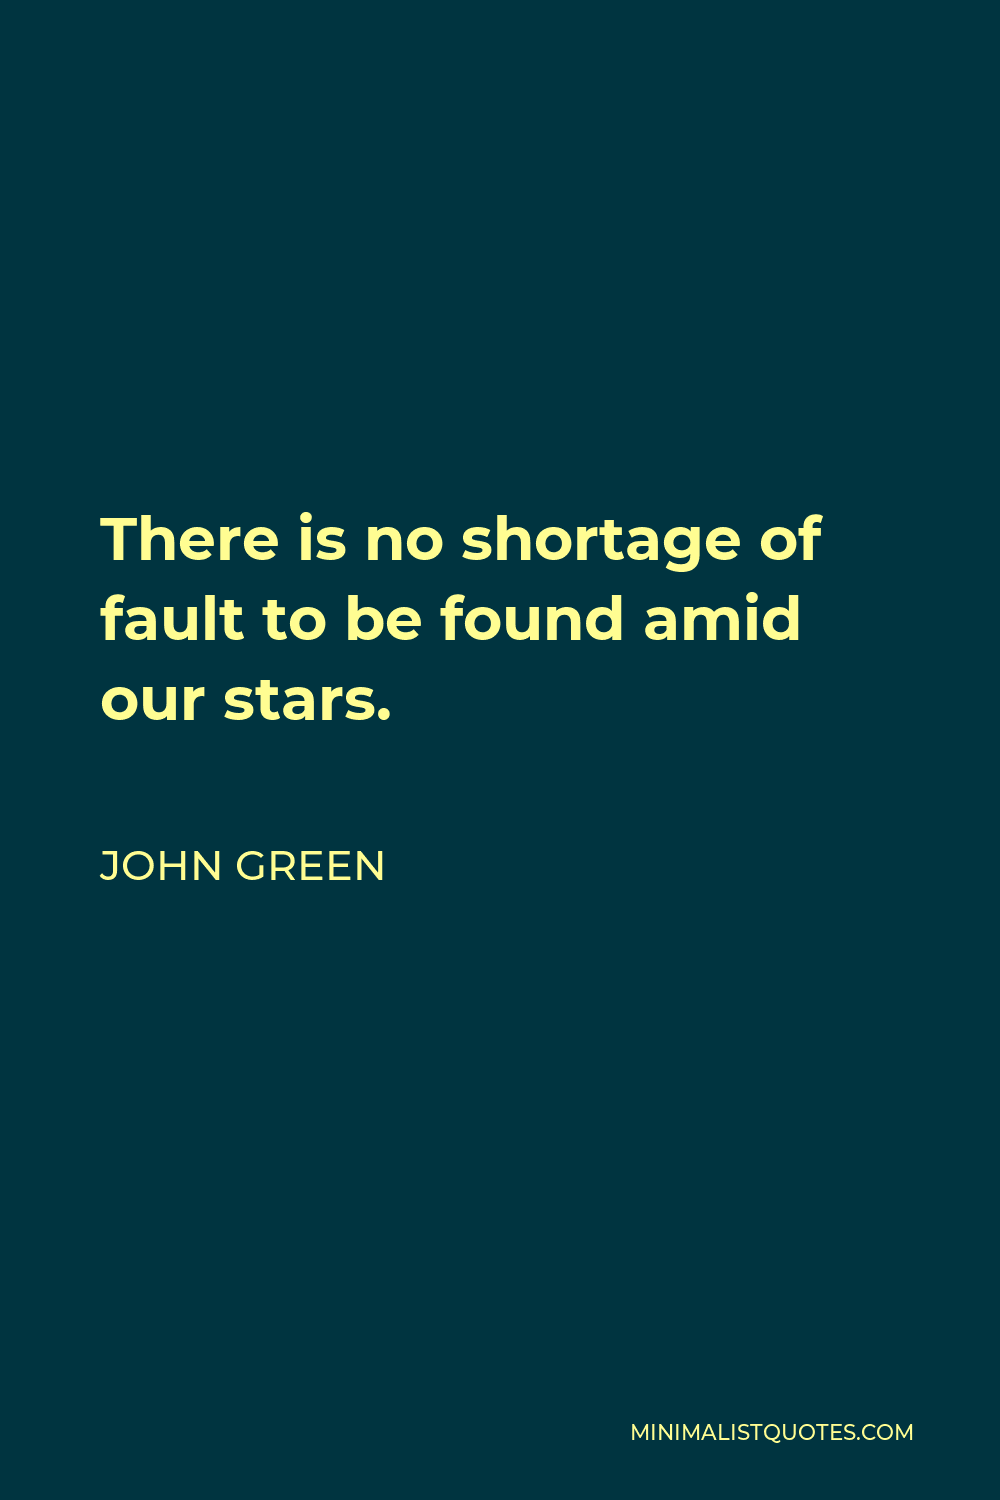 John Green Quote - There is no shortage of fault to be found amid our stars.